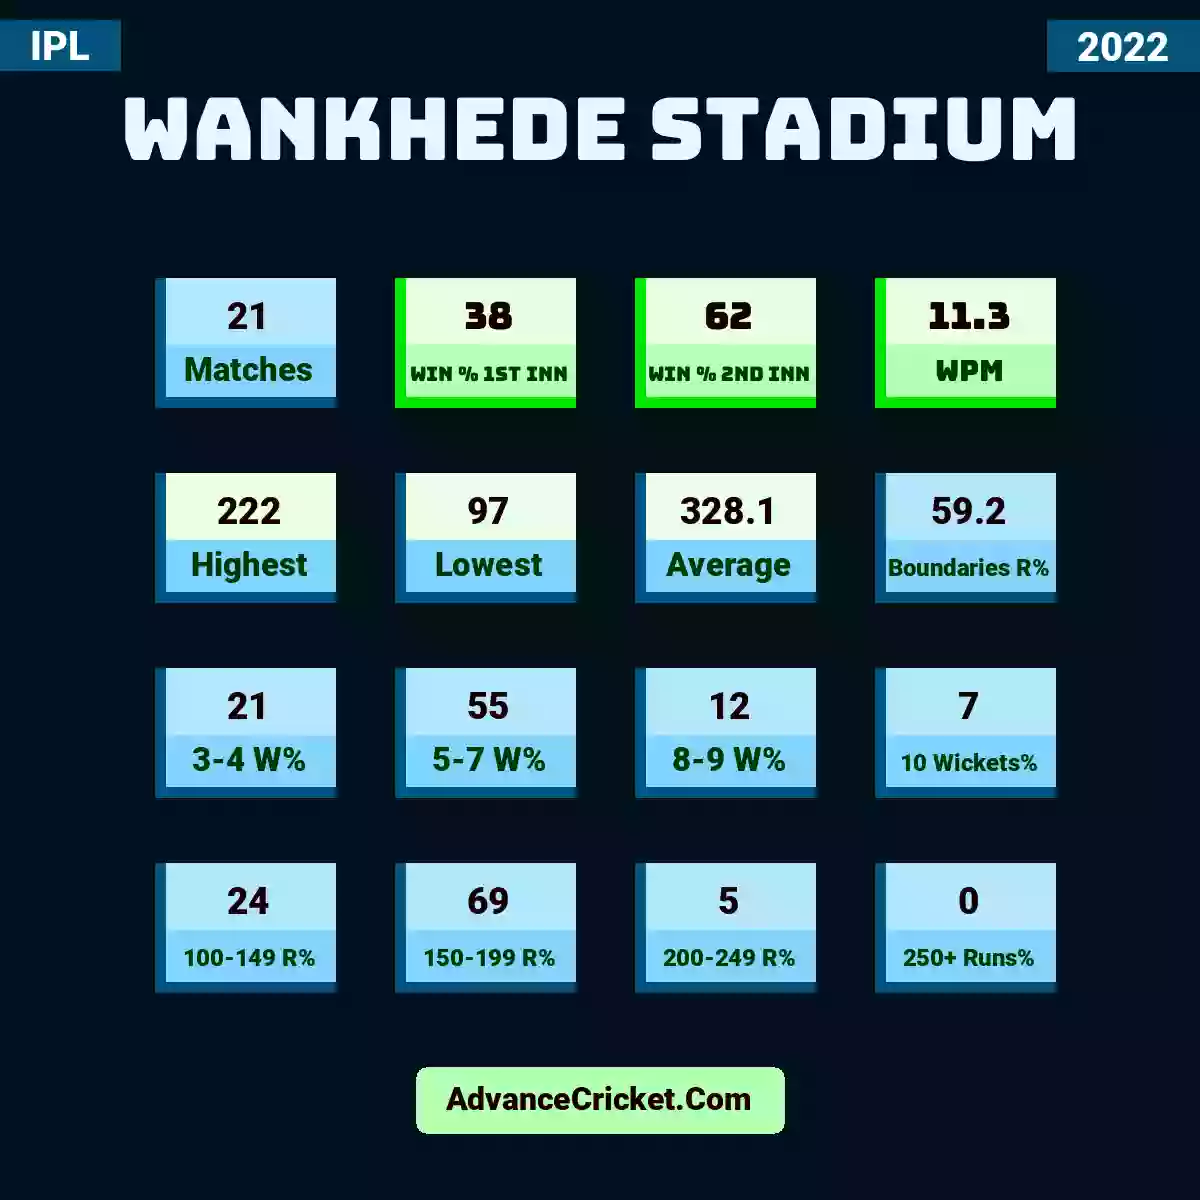 Image showing Wankhede Stadium with Matches: 21, Win % 1st Inn: 38, Win % 2nd Inn: 62, WPM: 11.3, Highest: 222, Lowest: 97, Average: 328.1, Boundaries R%: 59.2, 3-4 W%: 21, 5-7 W%: 55, 8-9 W%: 12, 10 Wickets%: 7, 100-149 R%: 24, 150-199 R%: 69, 200-249 R%: 5, 250+ Runs%: 0.